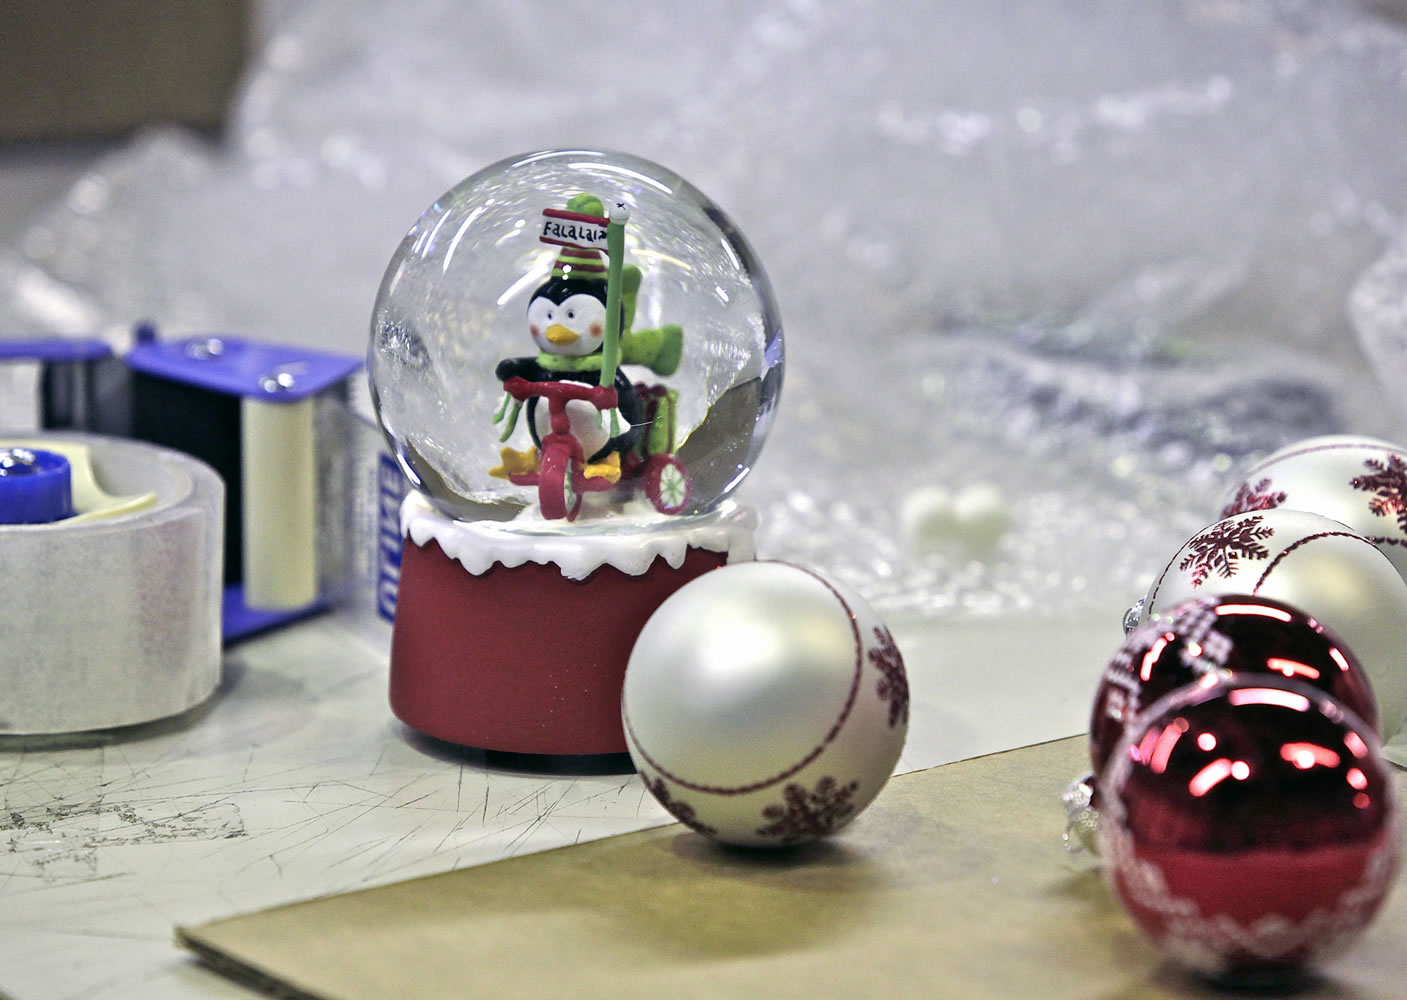 This Dec. 11 photo shows holiday decorations that survived repeated drops of an impact taster at the UPS Package Design and Testing Lab in Addison, Ill.